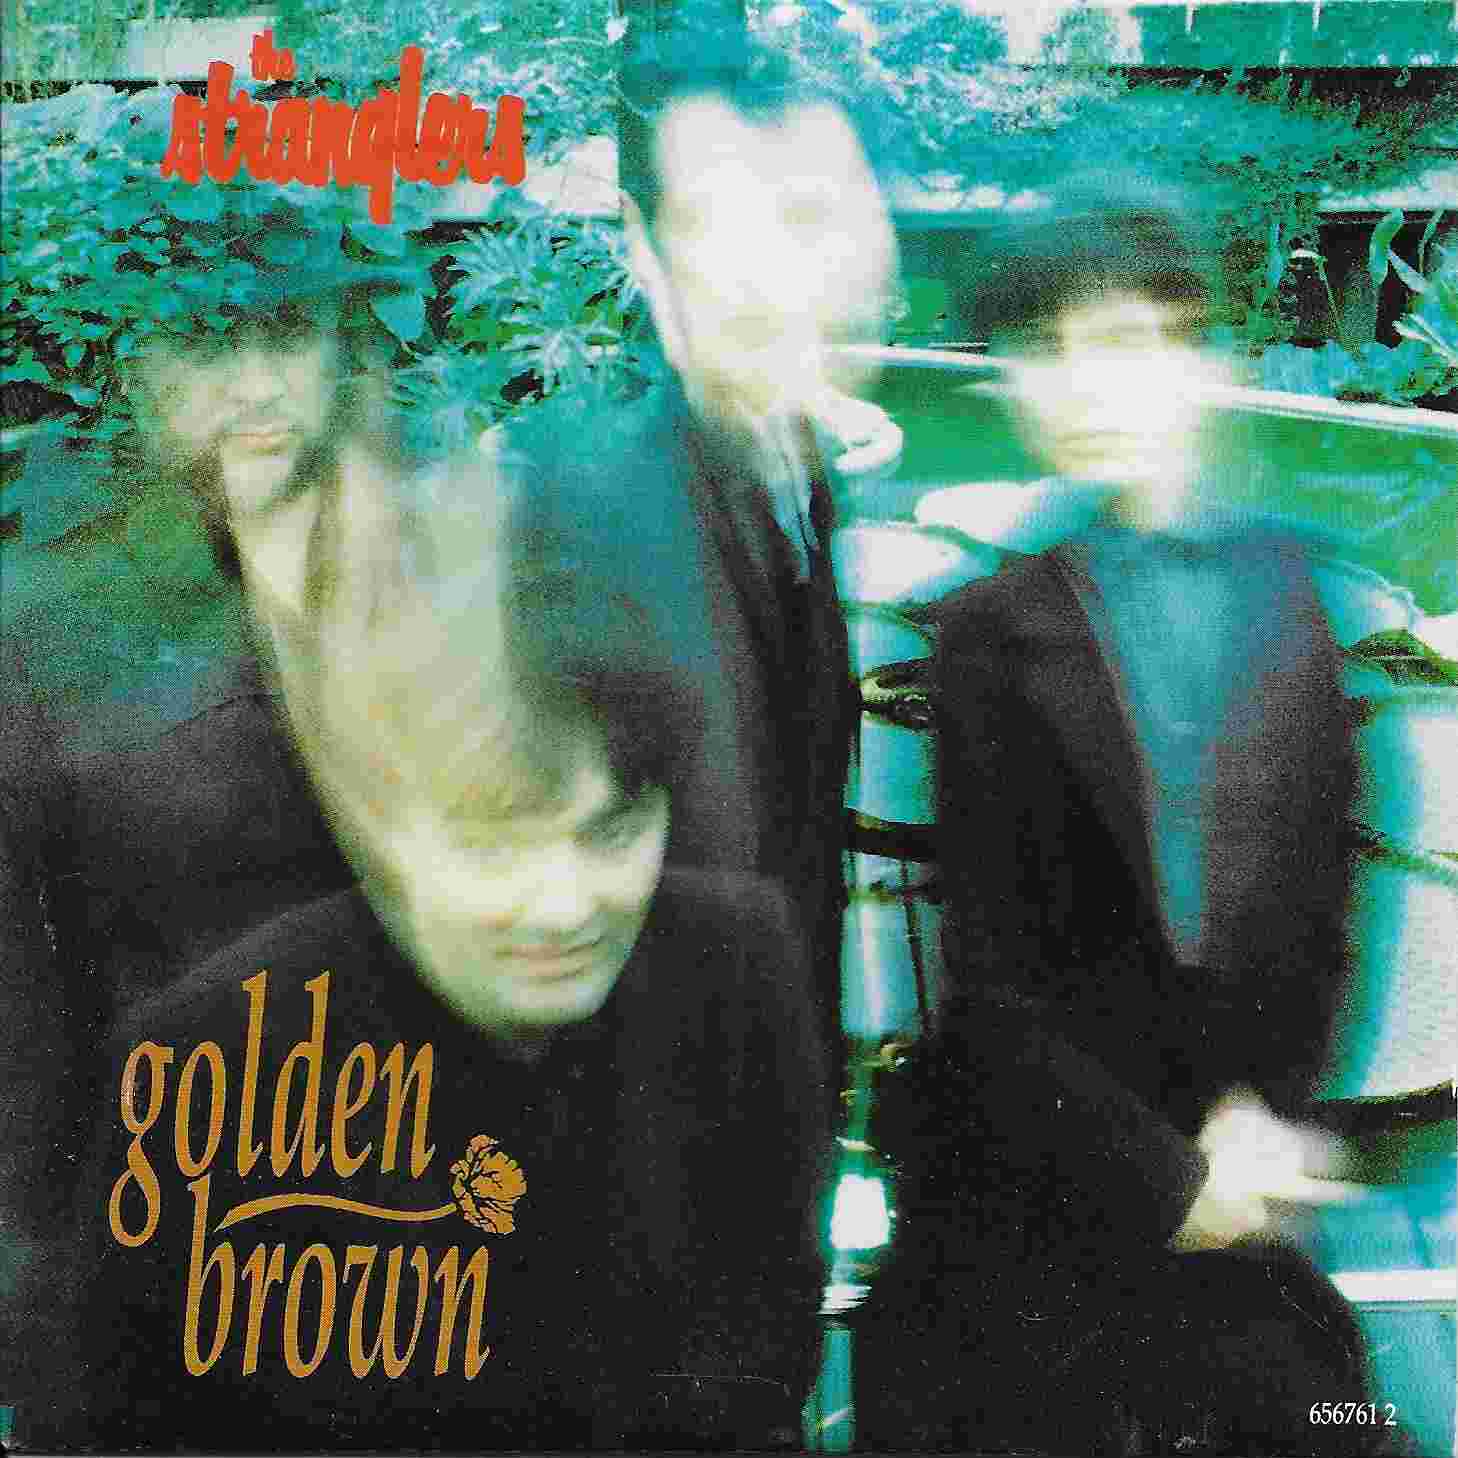 Picture of 656761 2 Golden brown by artist The Stranglers  from The Stranglers